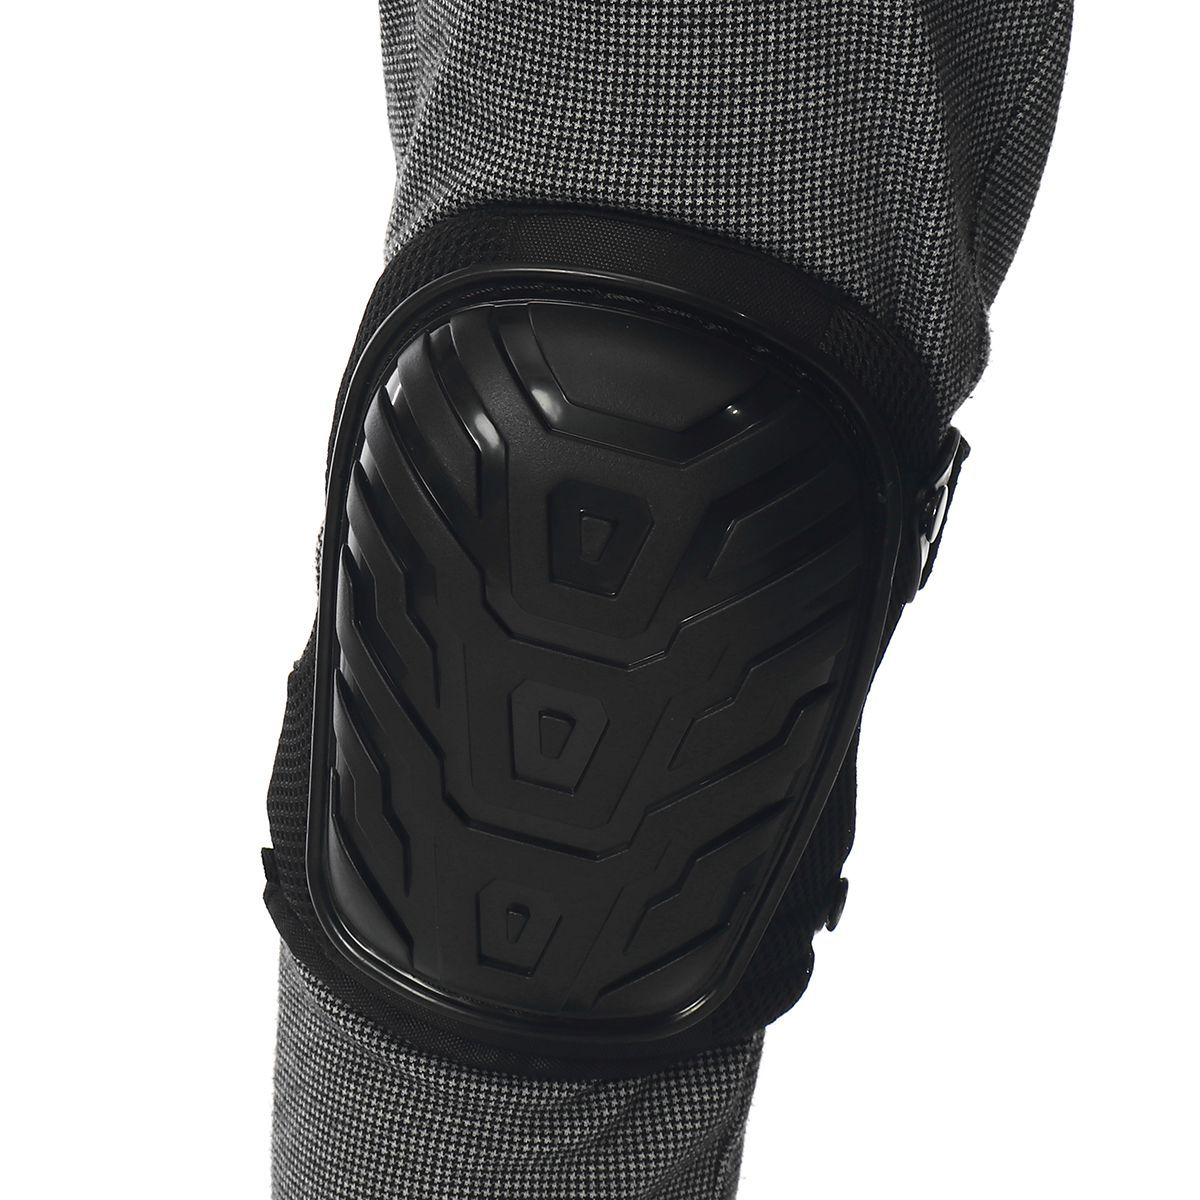 1-Pair-Silicone-Knee-Pads-Elasticity-Adjustable-Straps-Gardening-Safety-Support-Knee-Adjustable-Stra-1702158